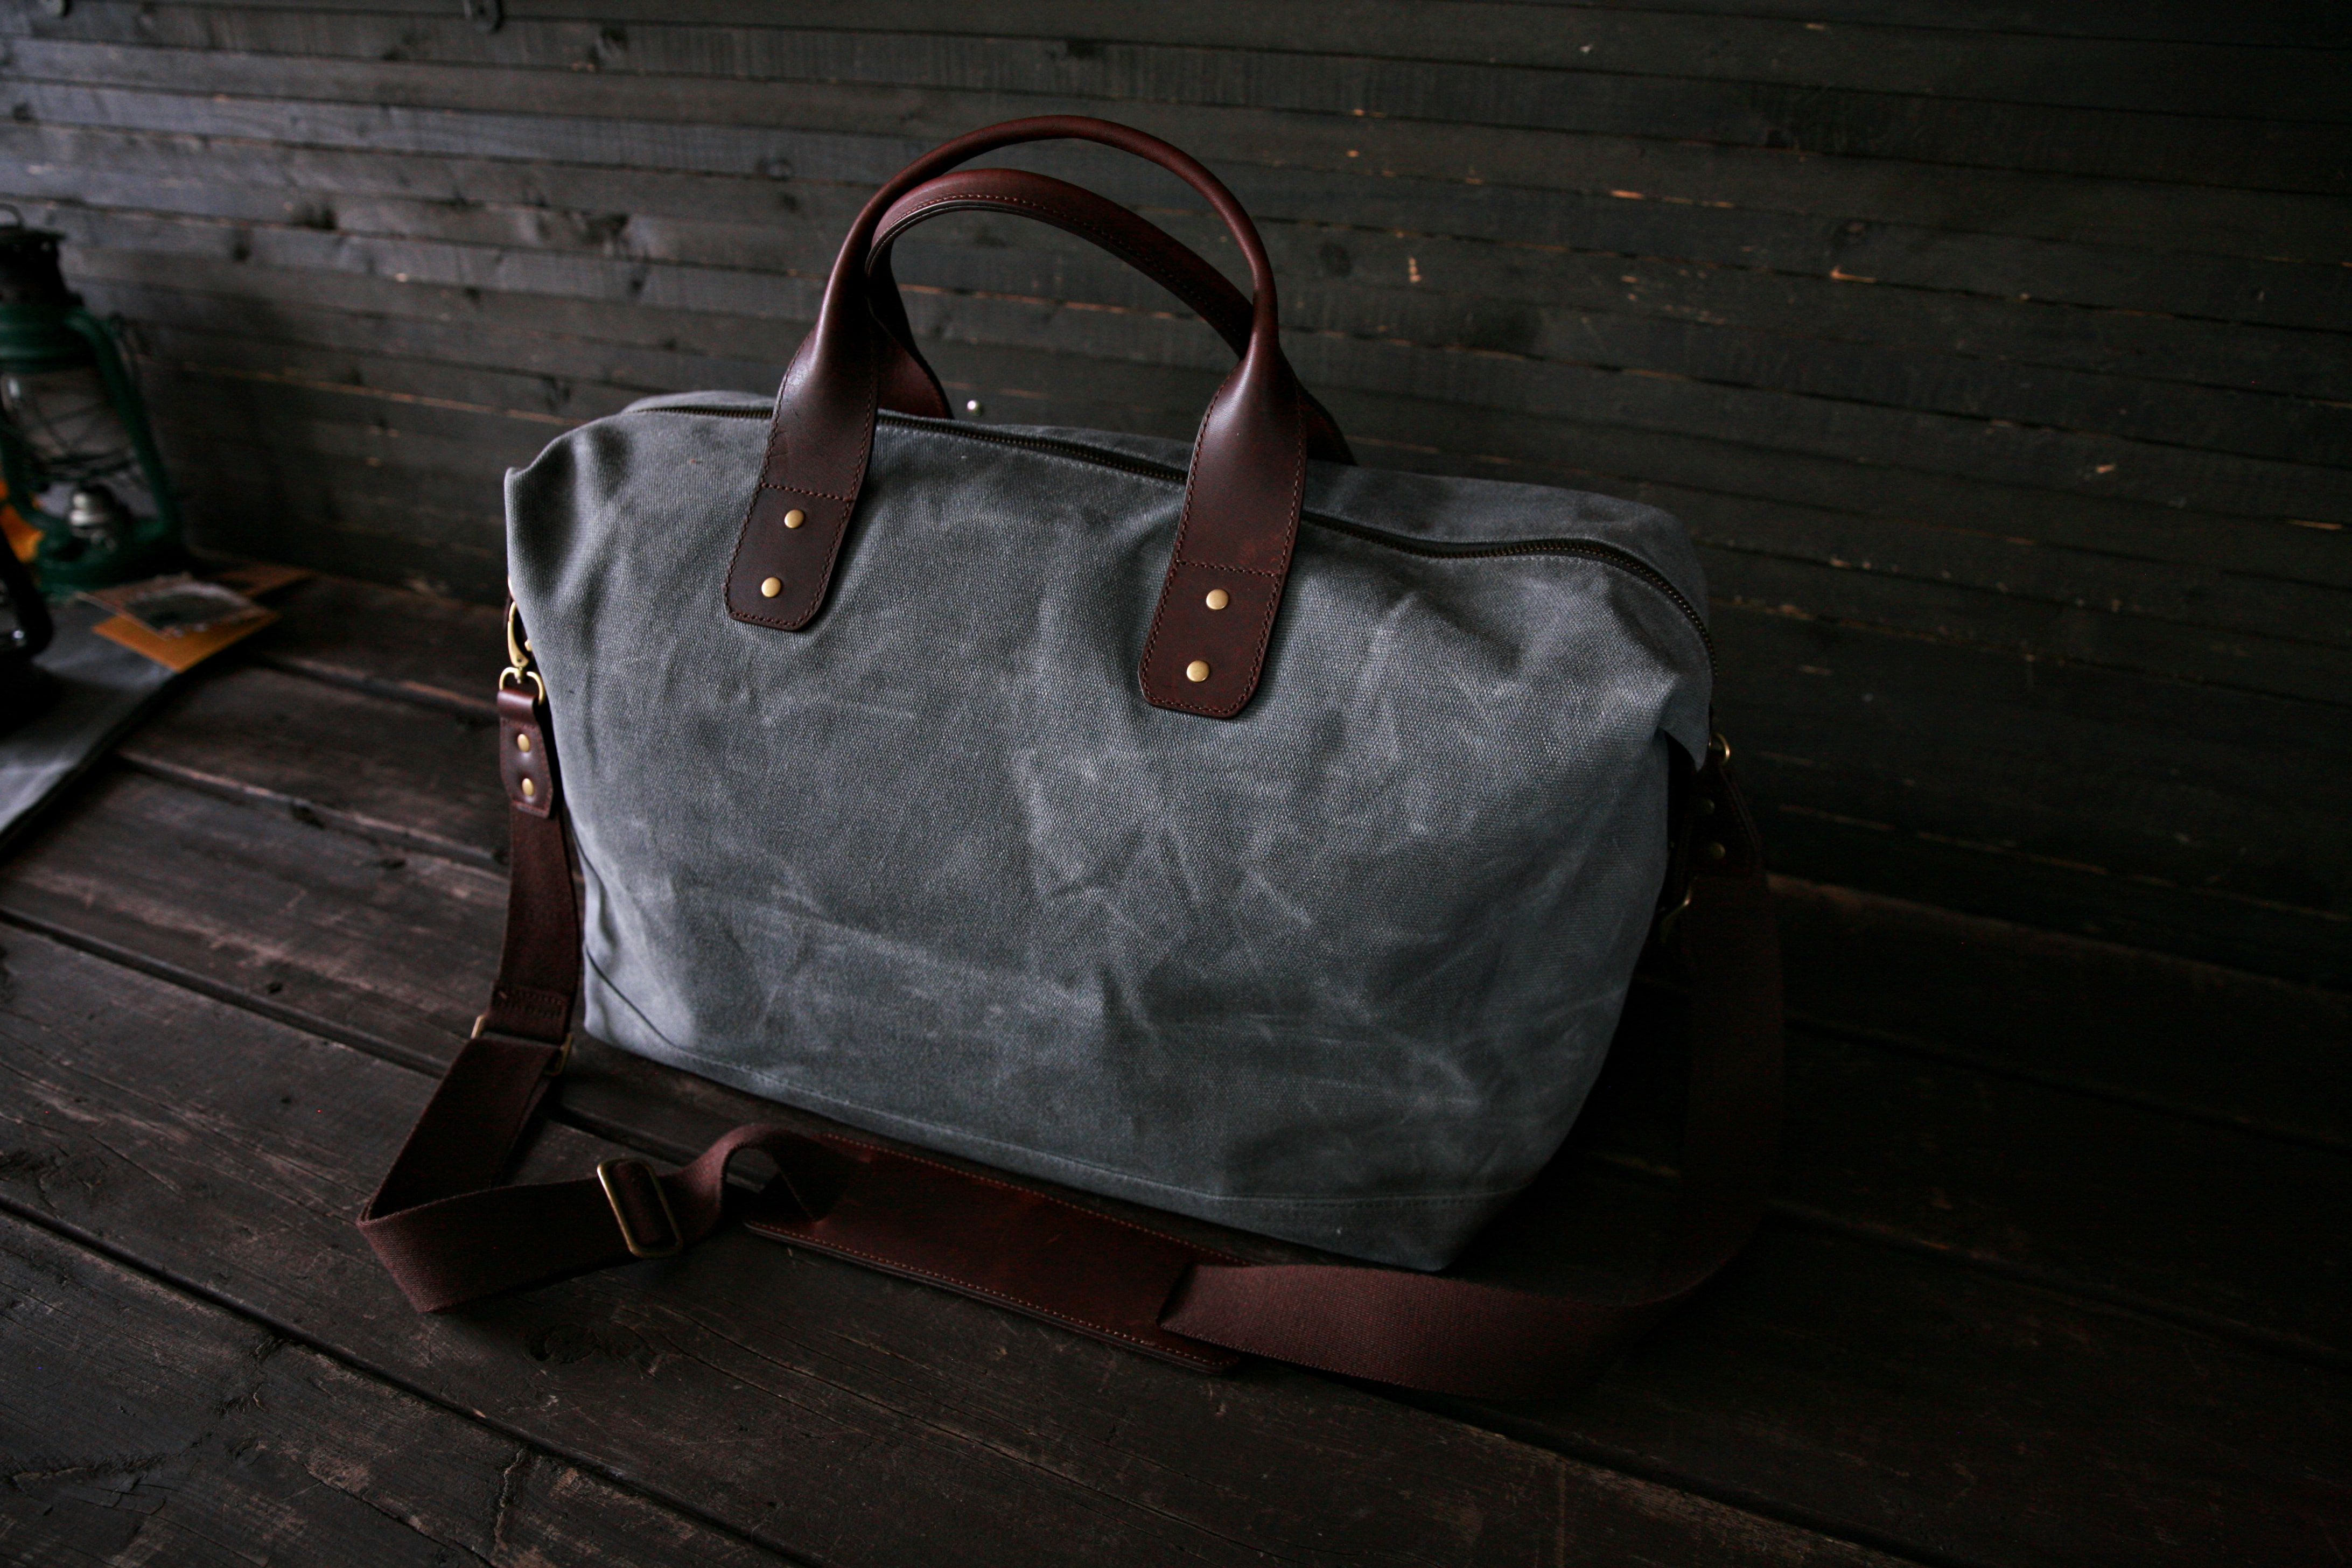 Waxed Canvas Tote Bag, Leather and Waxed Canvas Purse